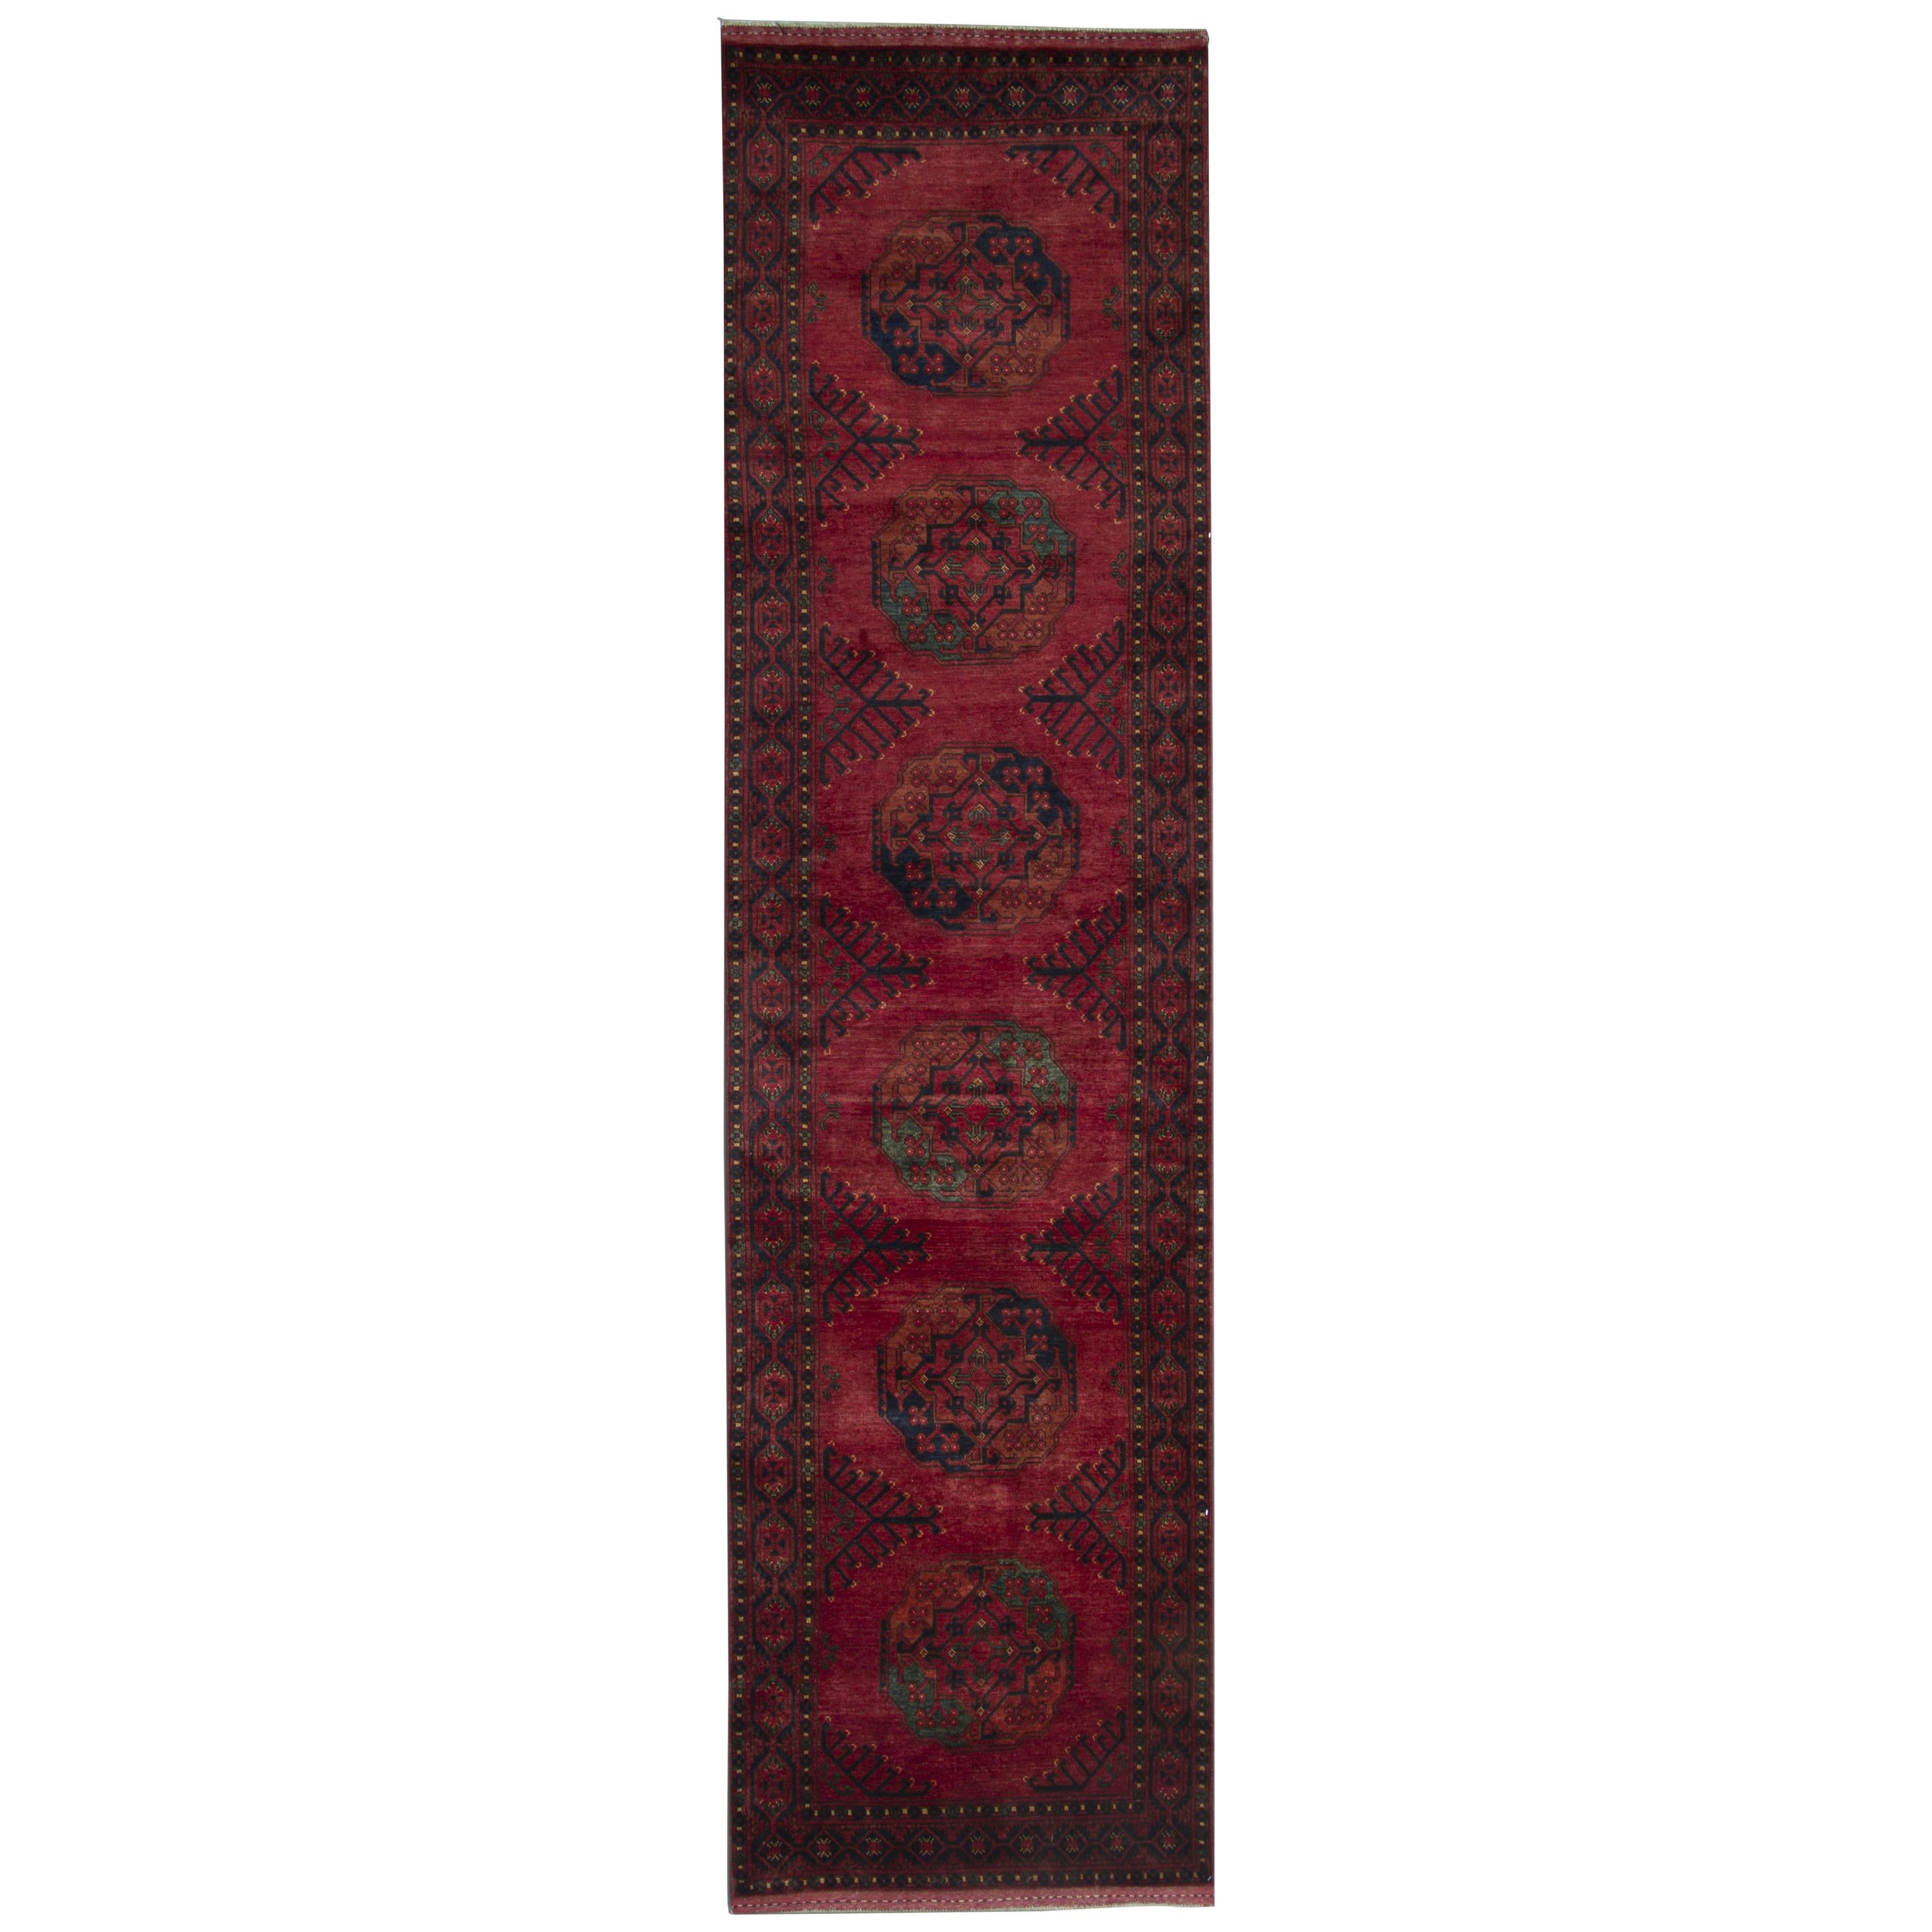 Traditional Runner Rug, Hand woven Oriental Red Wool Rugs for Sale For Sale